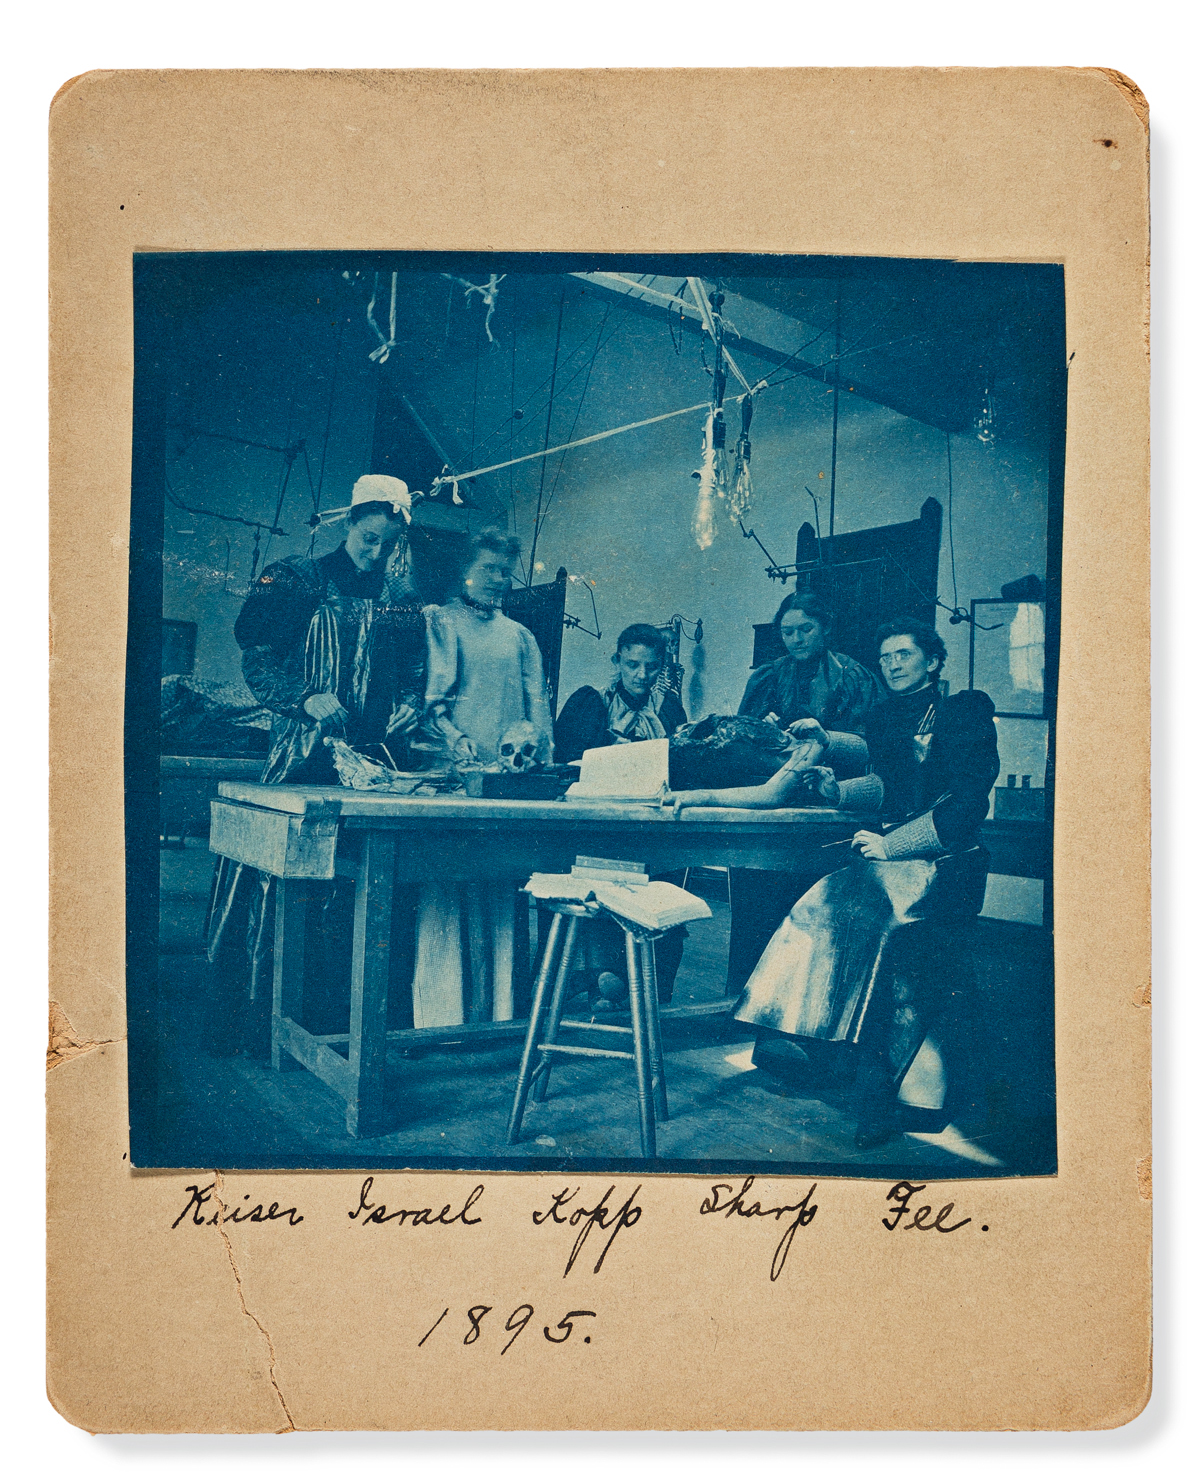 Womans Medical College of Pennsylvania. Cyanotype of Anatomy Class with Students and Cadaver.